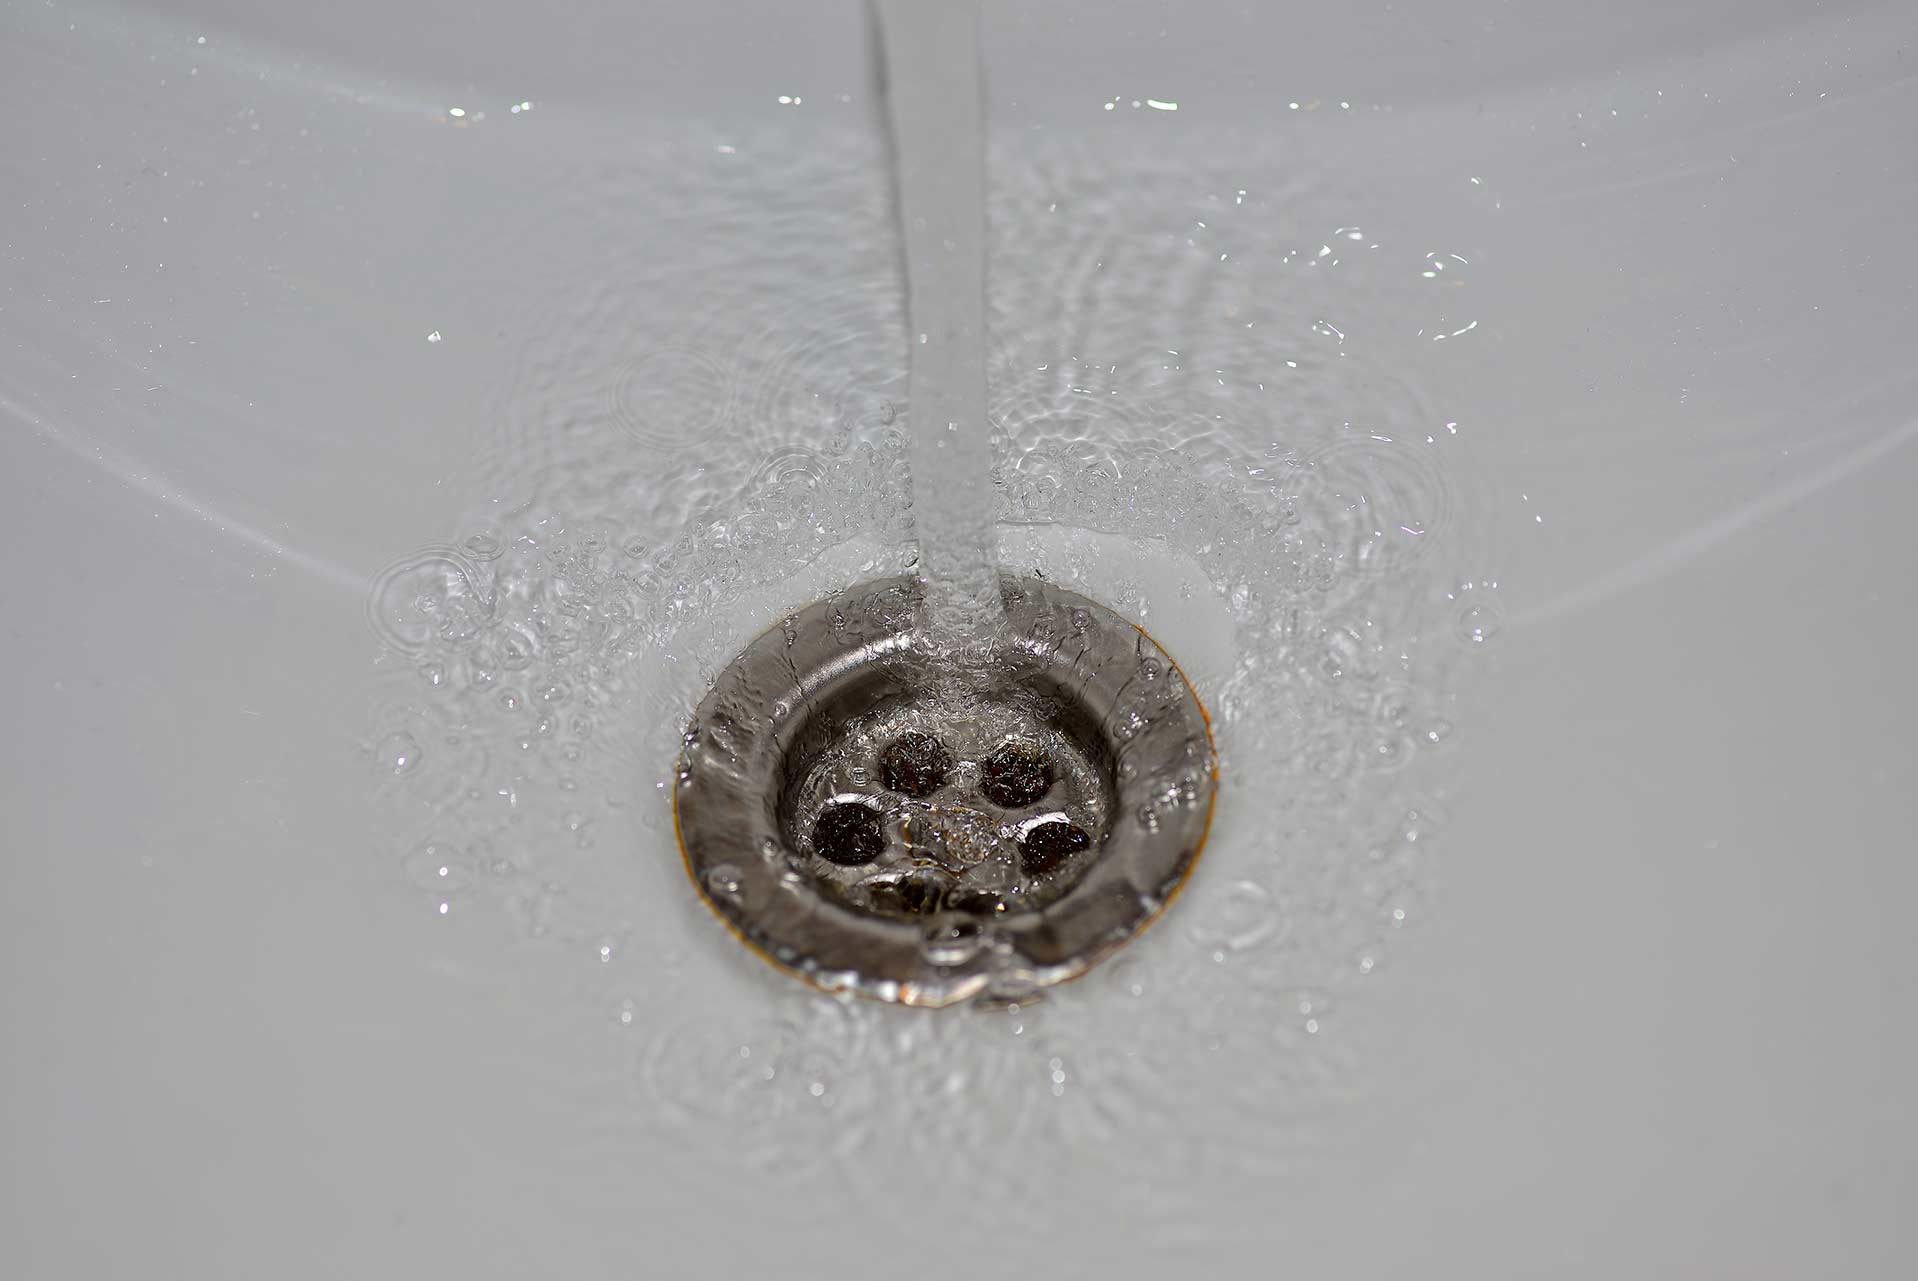 A2B Drains provides services to unblock blocked sinks and drains for properties in Birmingham.